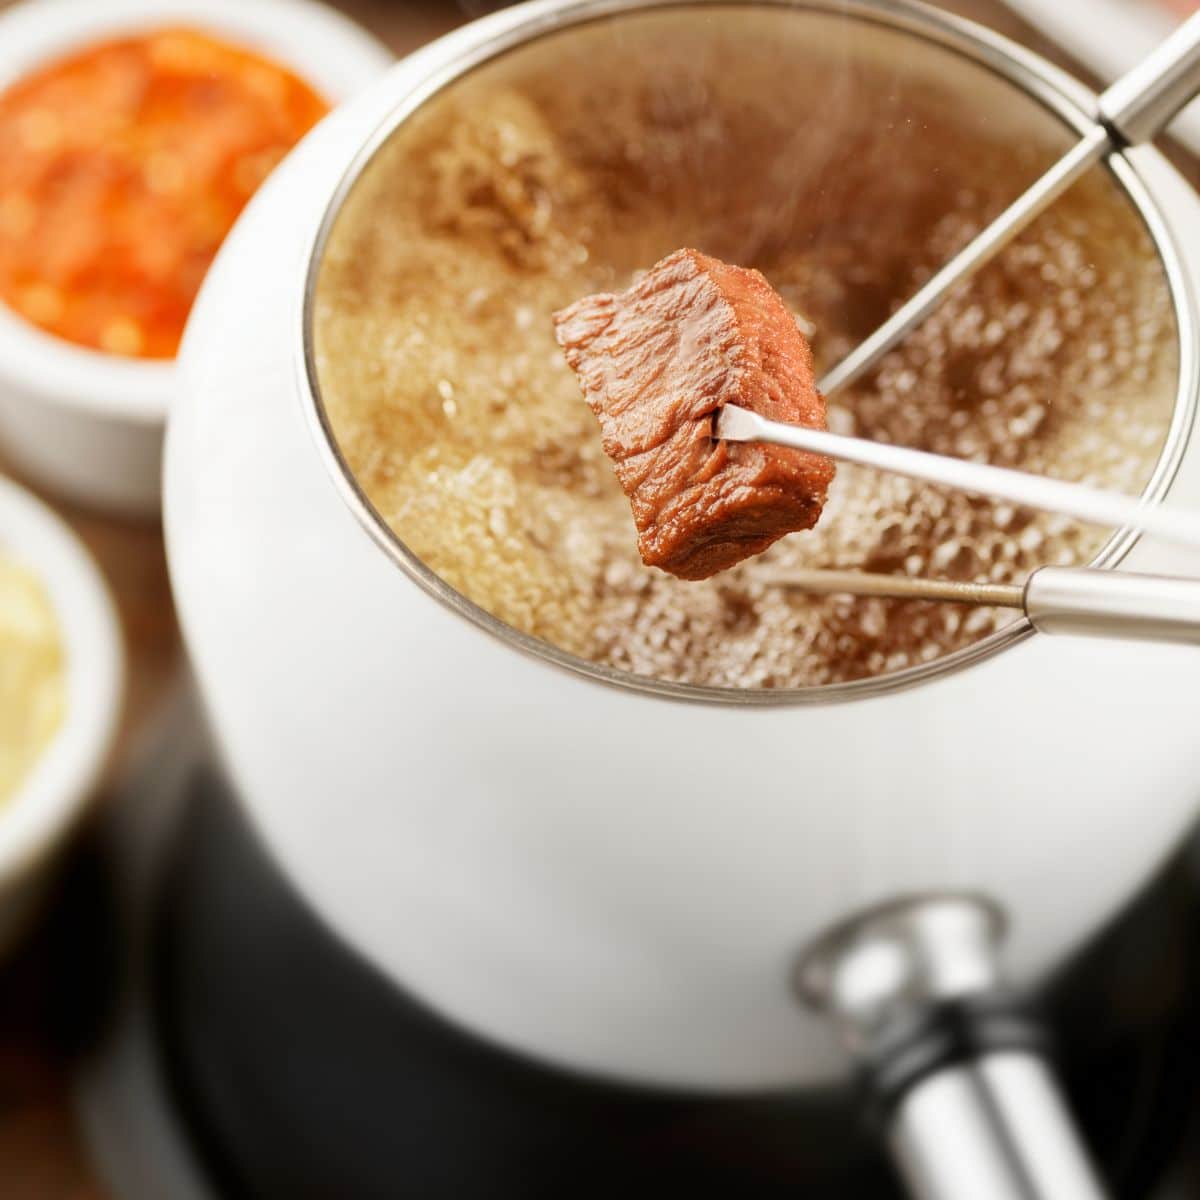 Square image of meat being dipped into oil fondue.